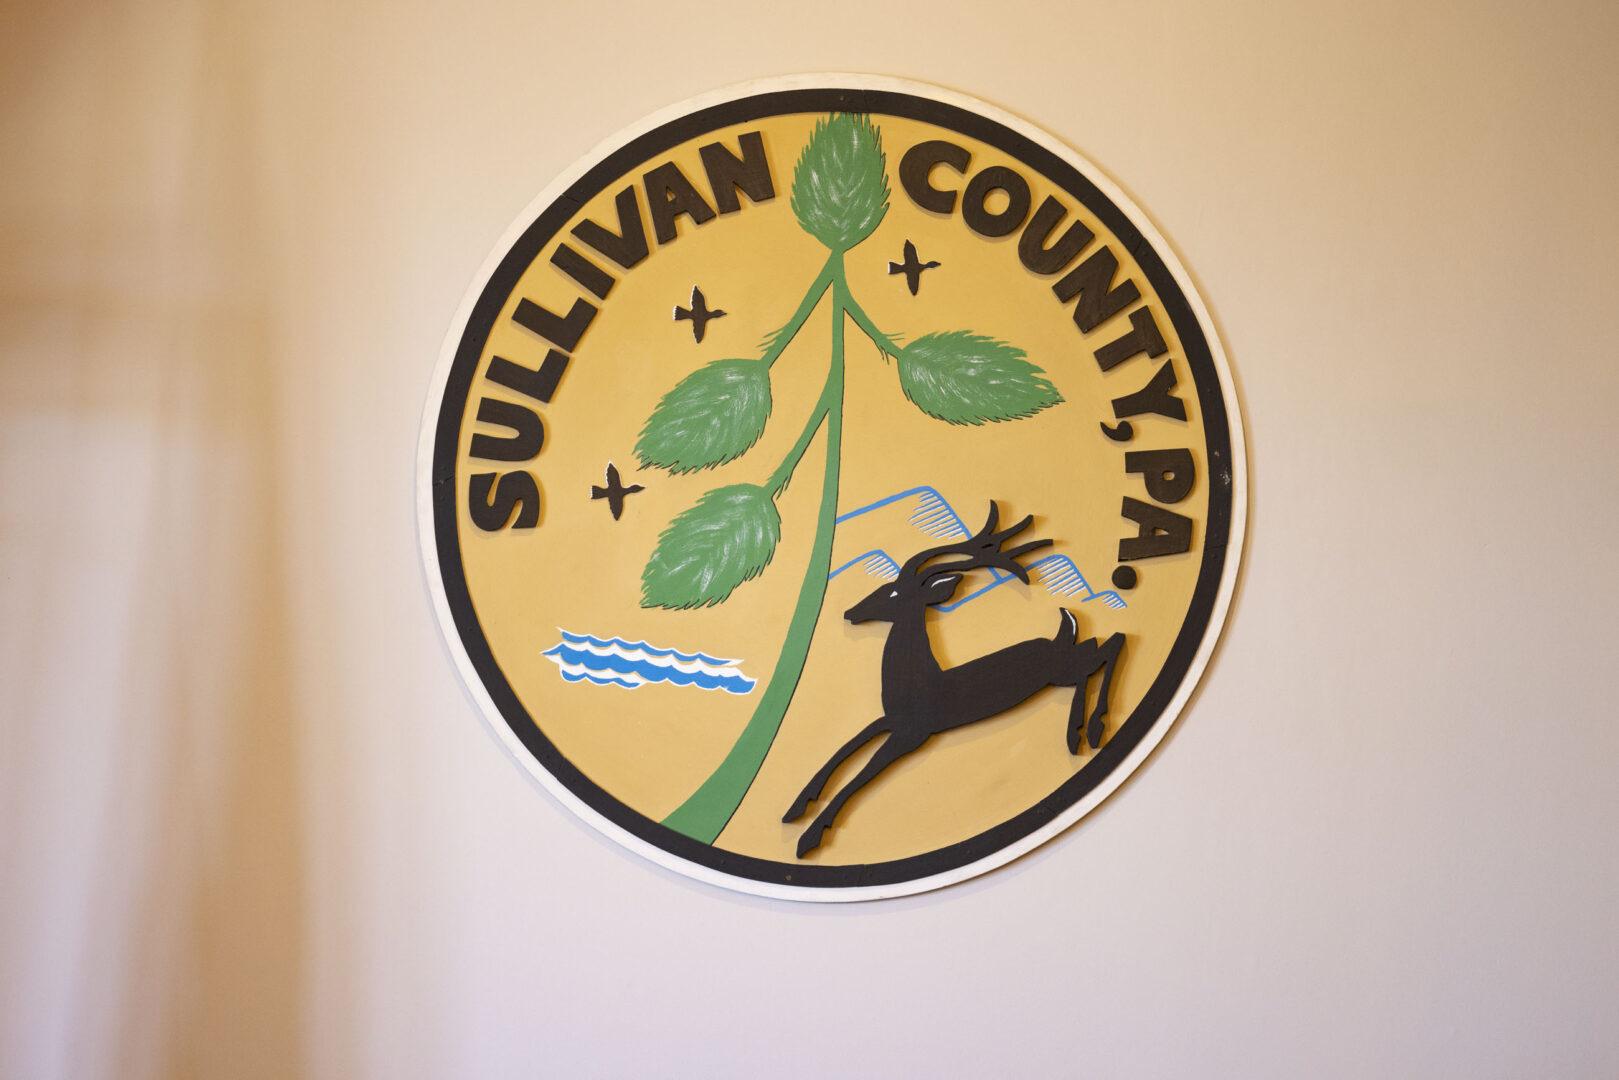 Residents in Sullivan County won’t be able to get grant money from the new Whole-Home Repairs Program after officials there opted out of participating.